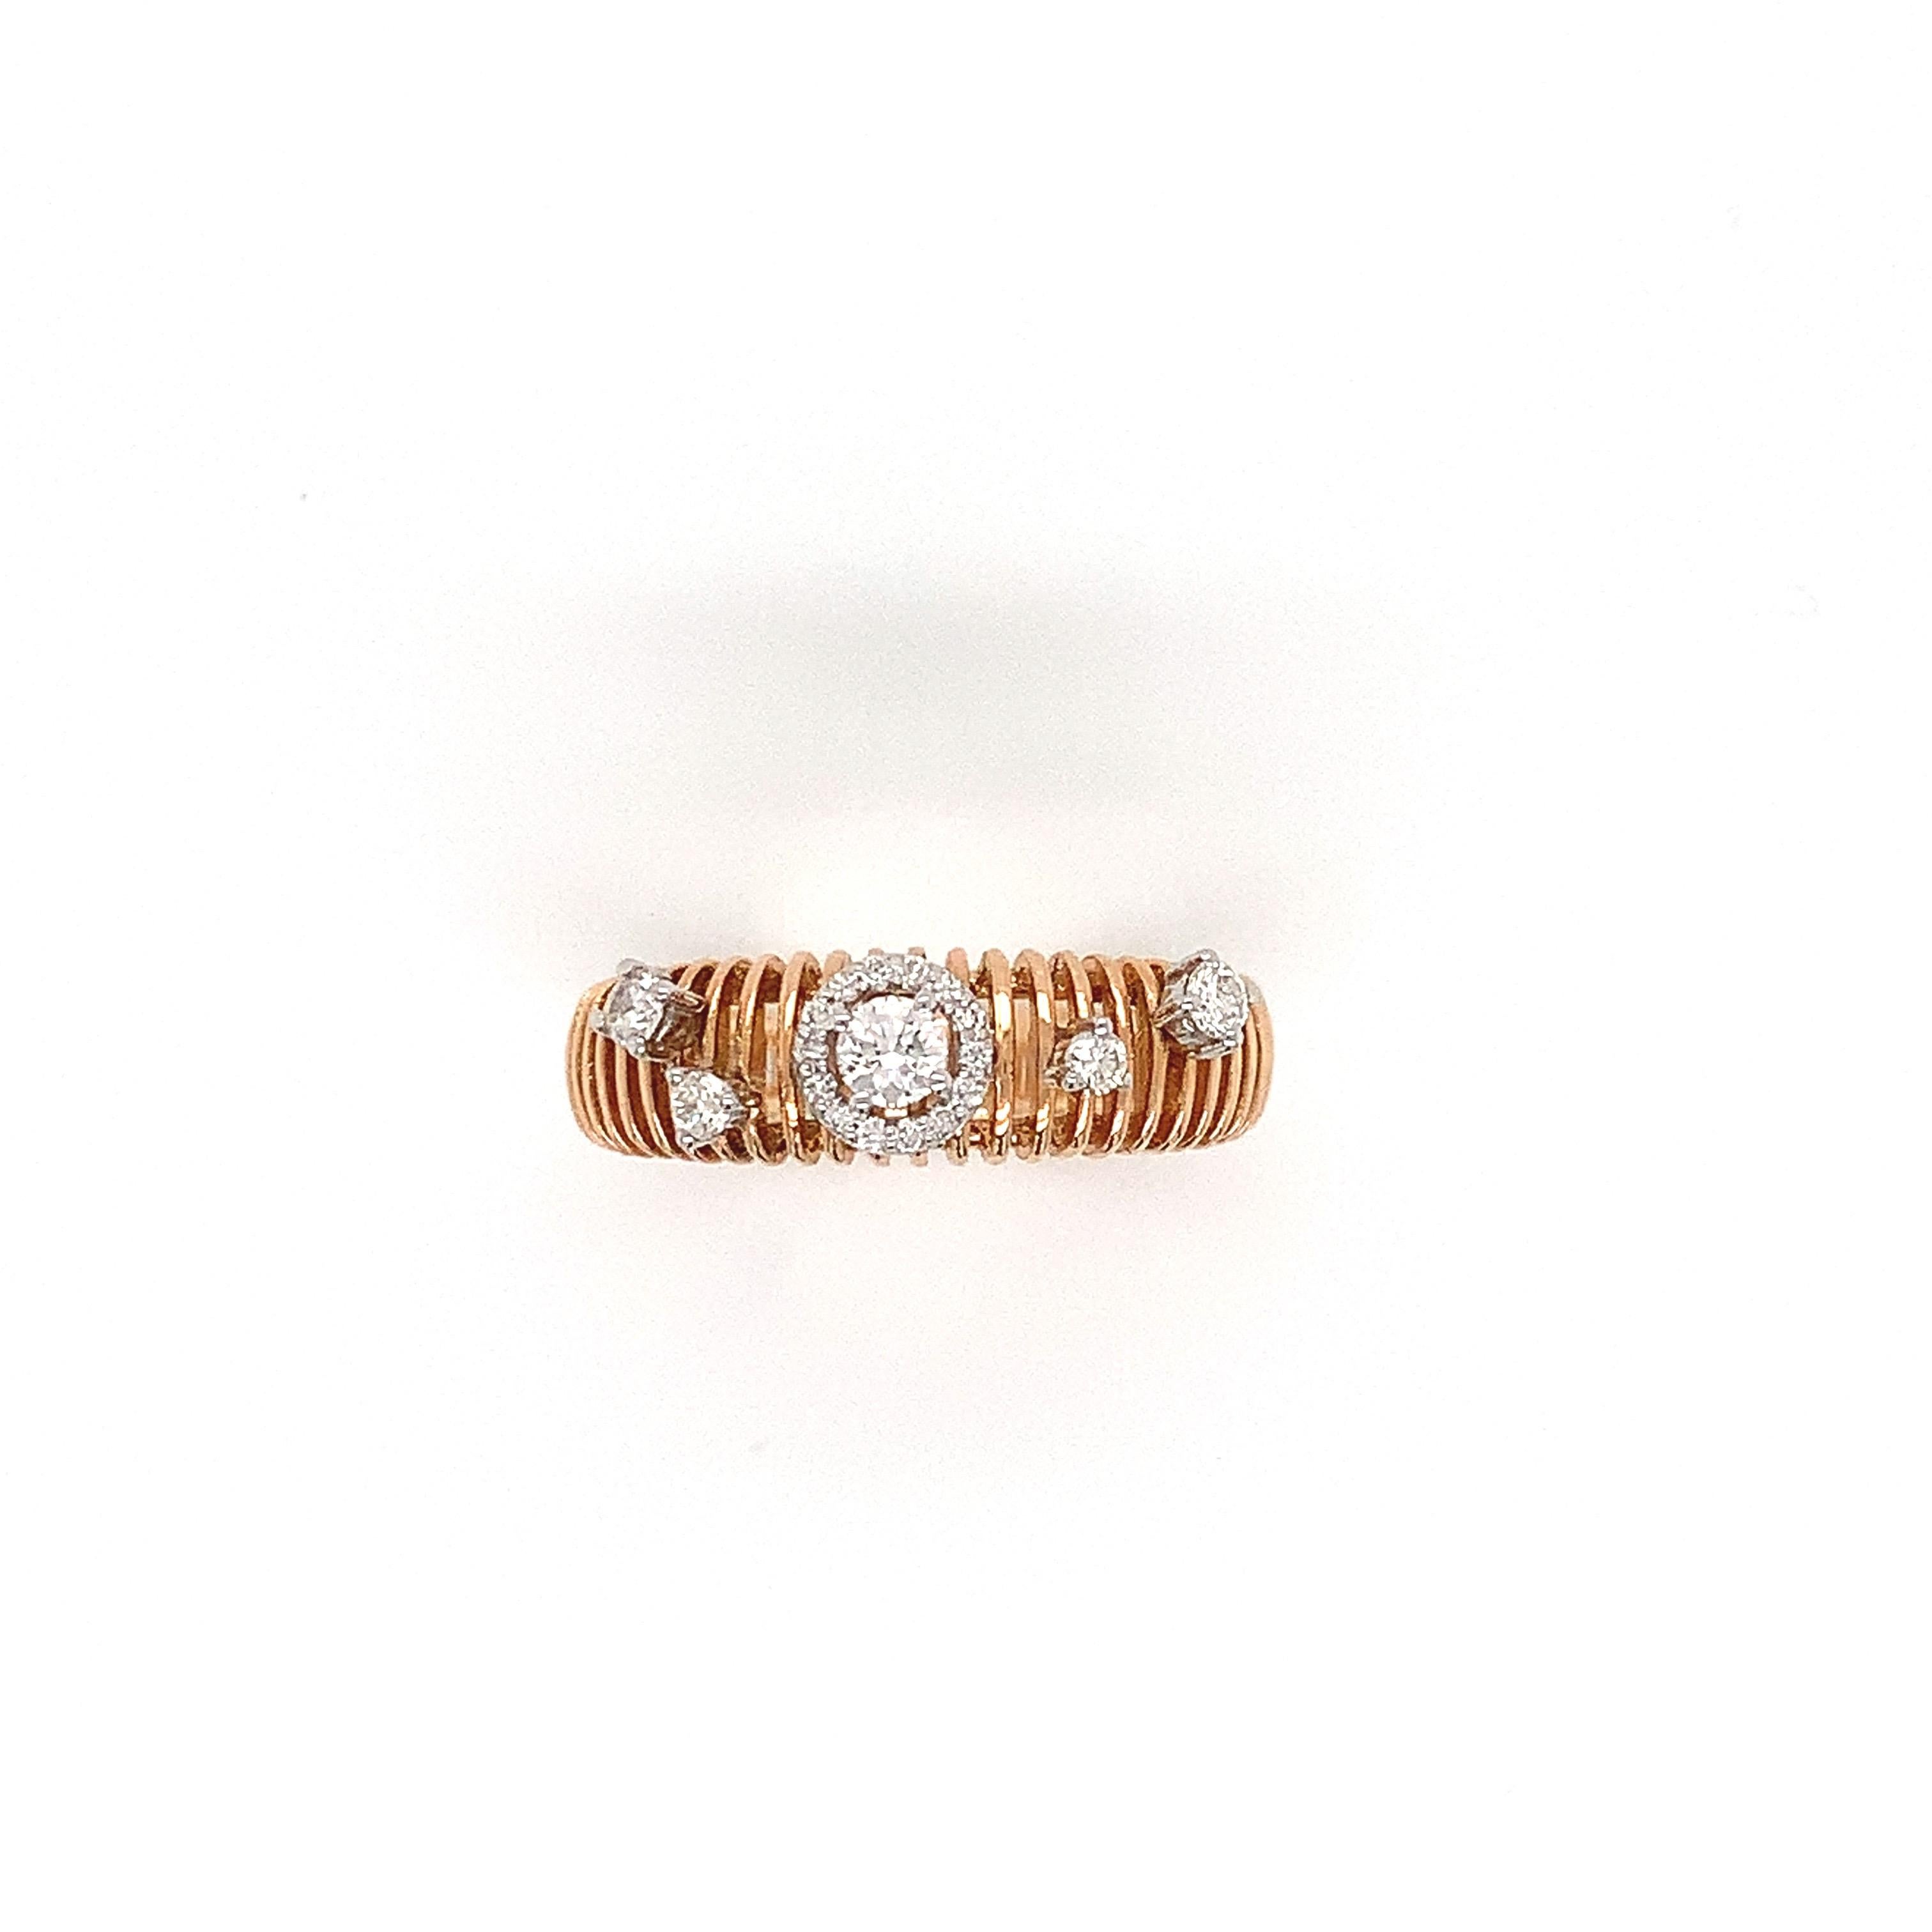 OWN Your Story 18K Rose Gold White Diamond Sprinkled Verical Lined Ring

OWN Your Story brings its 3 generations of family tradition and unparalleled experience with 18K gold, diamonds, and gemstones to create high-level jewelry handcrafted in